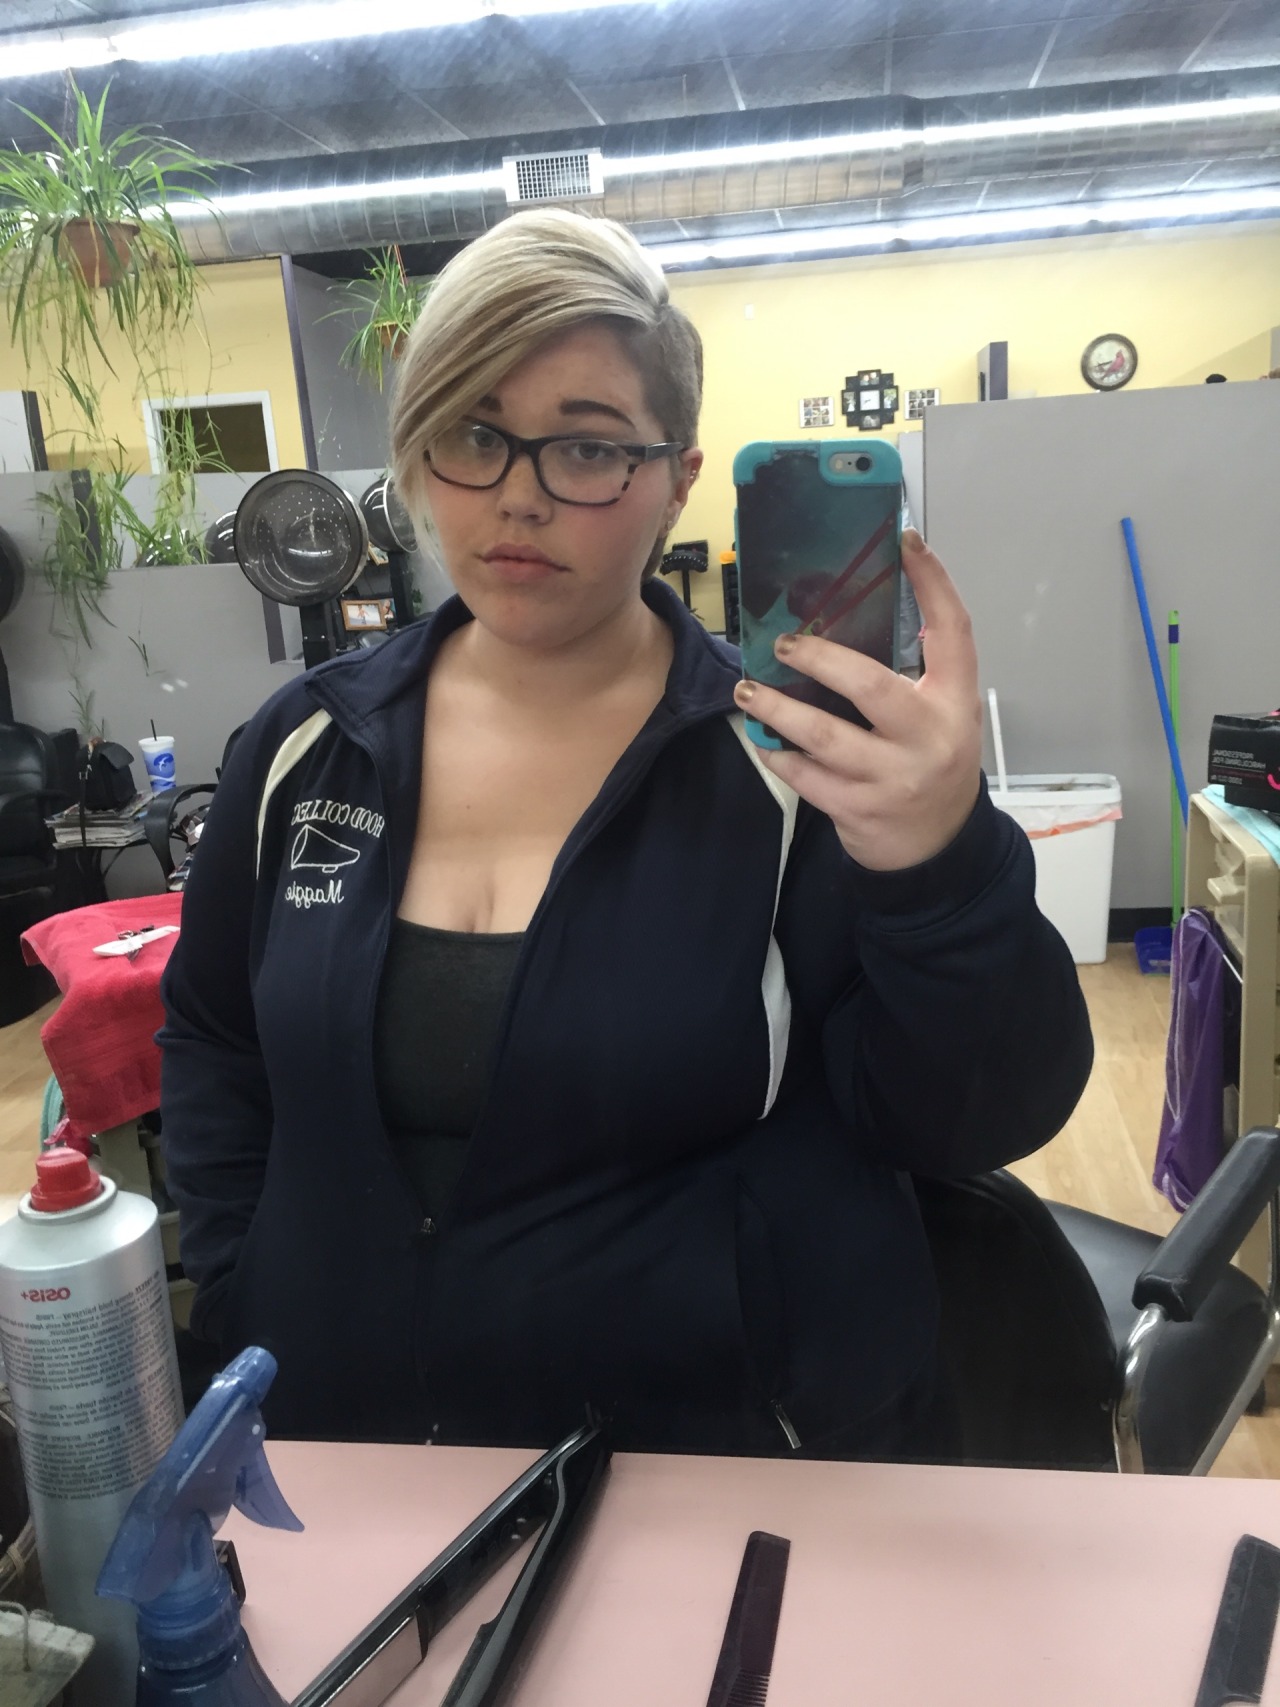 chubbyqueerstyle:  Hot lesbian gets killer cut and color   Very cute &amp; sexy